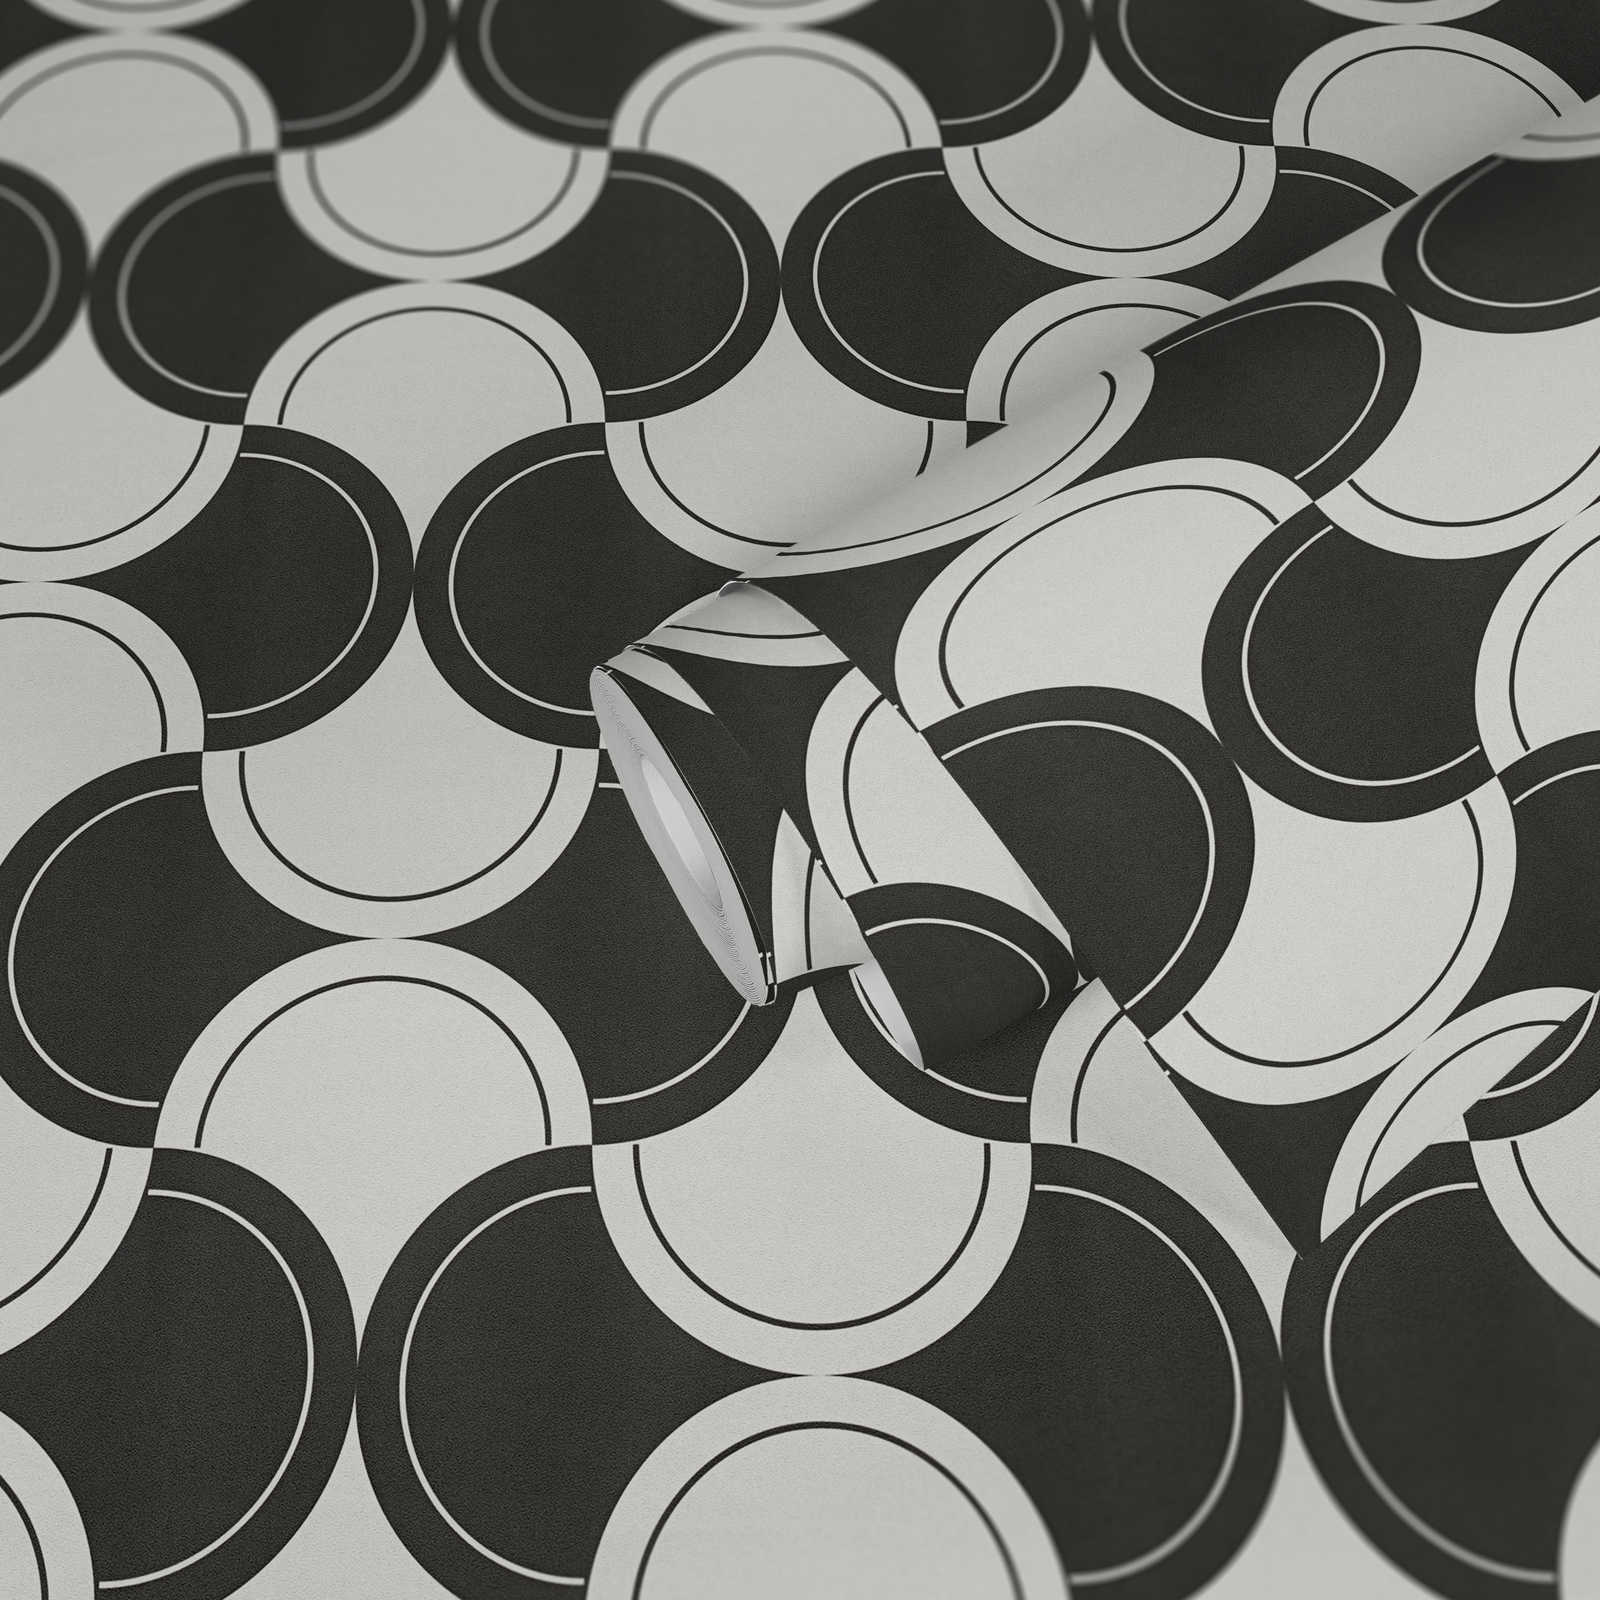             Non-woven wallpaper retro pattern with circles 70s style - black and white
        